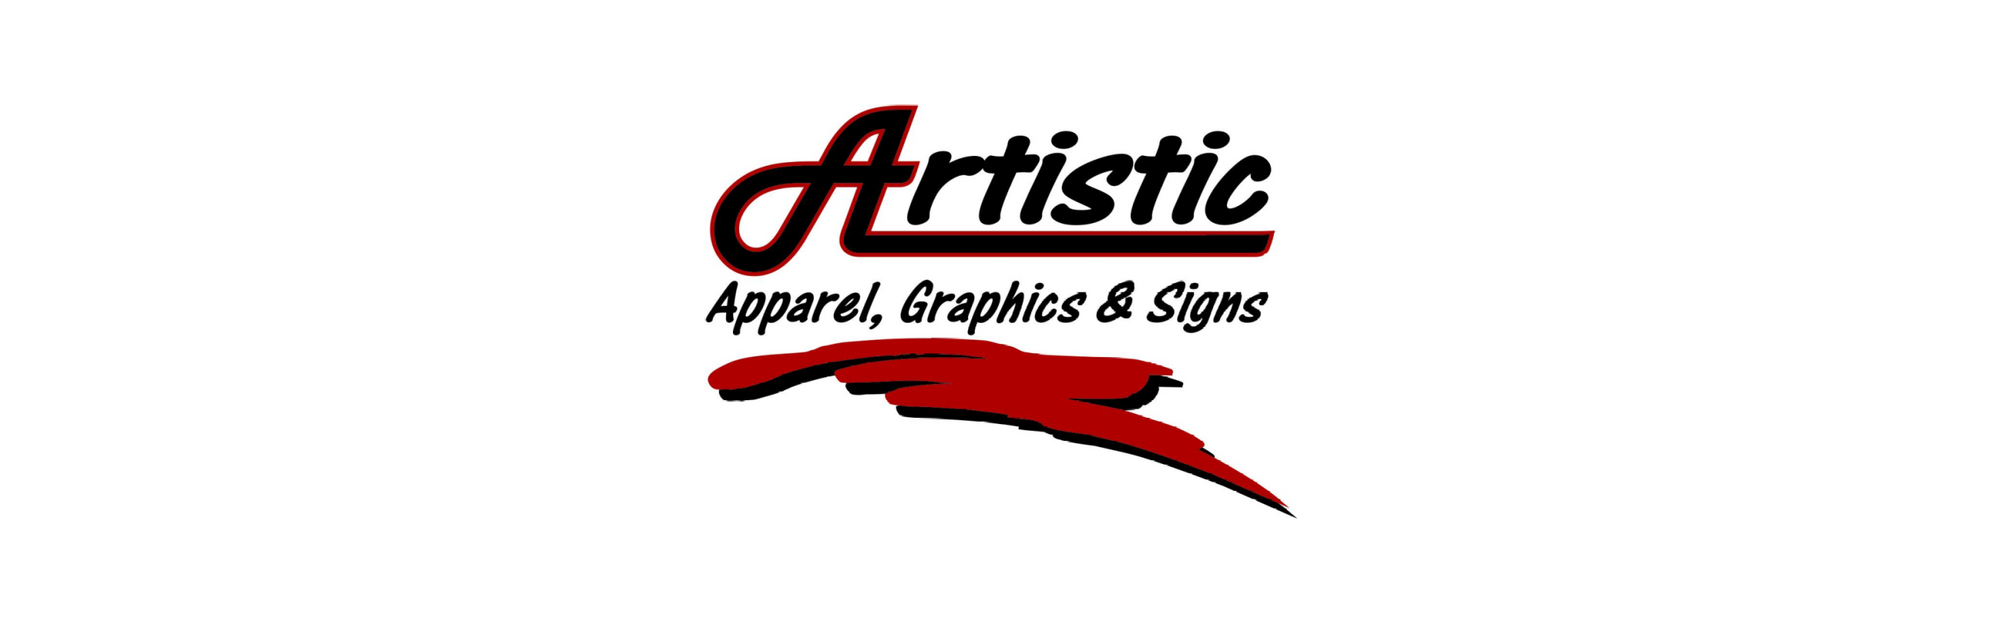 Get Your Brand Out There - Artistic Apparel, Graphics & Sign